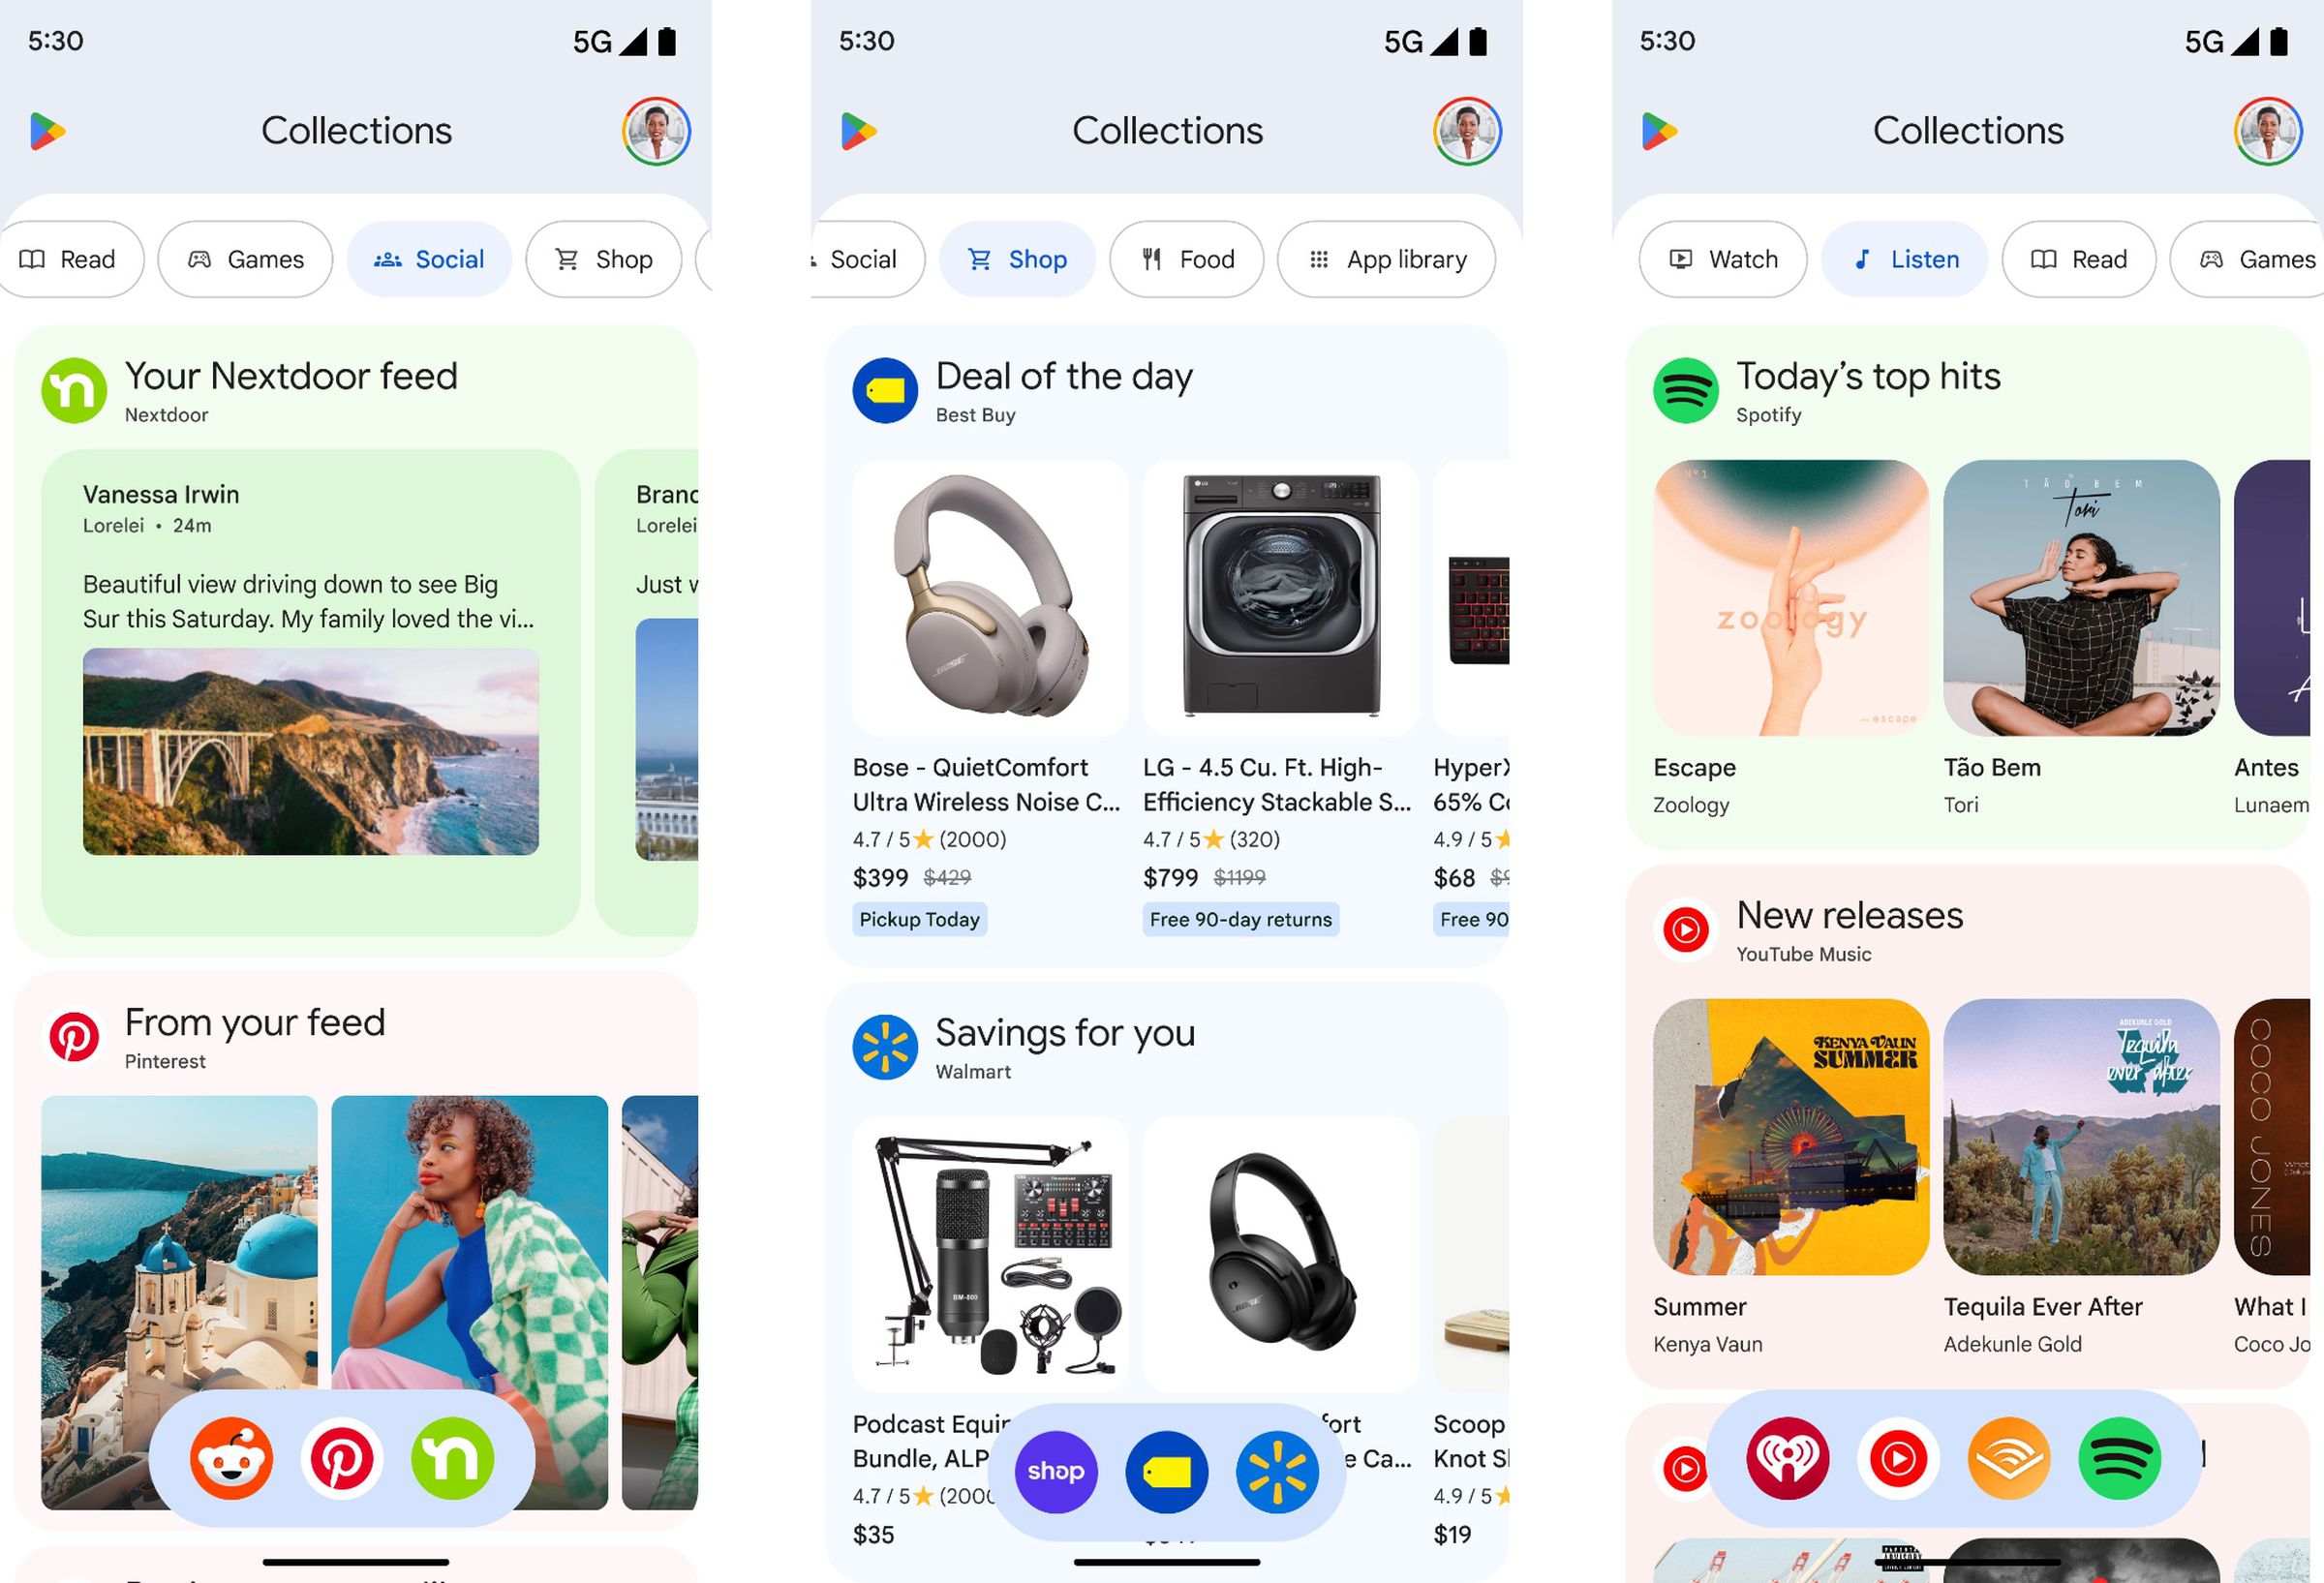 Screenshots of the new Collections section of Google Play.